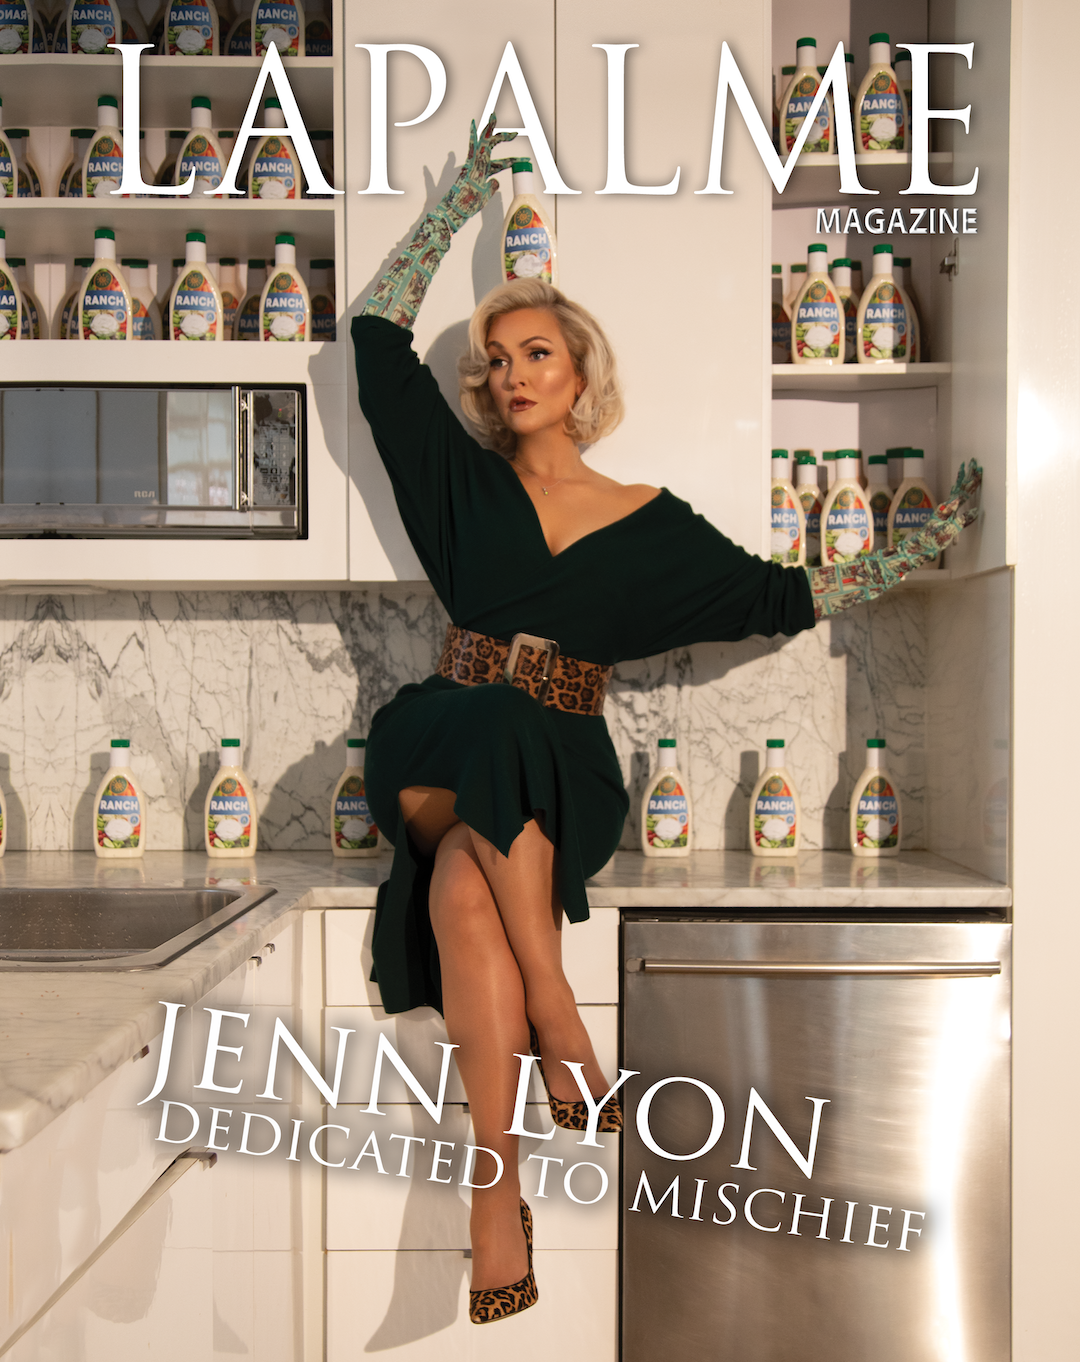 CLAWS Star Jenn Lyon: Dedicated to Mischief, And Her Love for Sketch Comedy